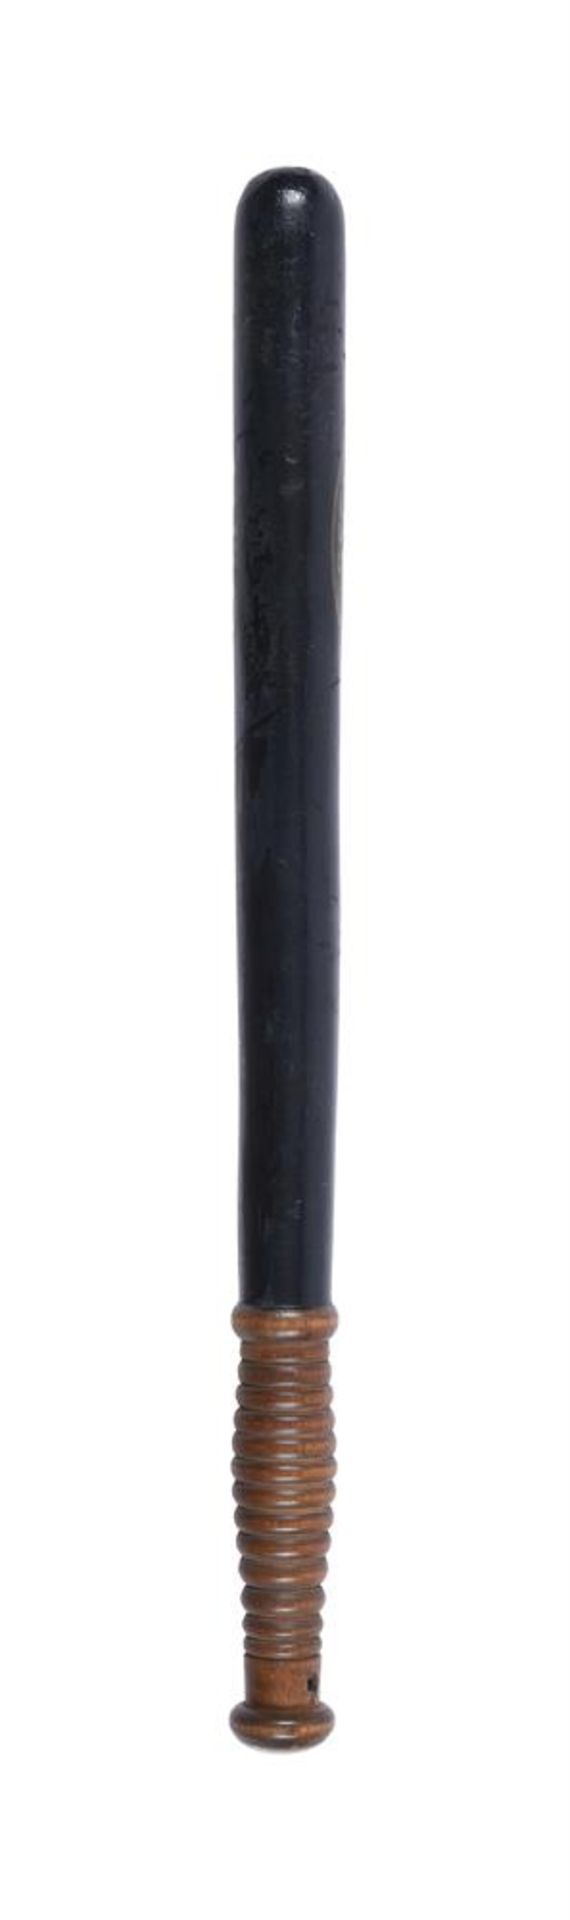 A VICTORIAN SCOTTISH SPECIAL CONSTABLE'S TRUNCHEON - Image 2 of 2